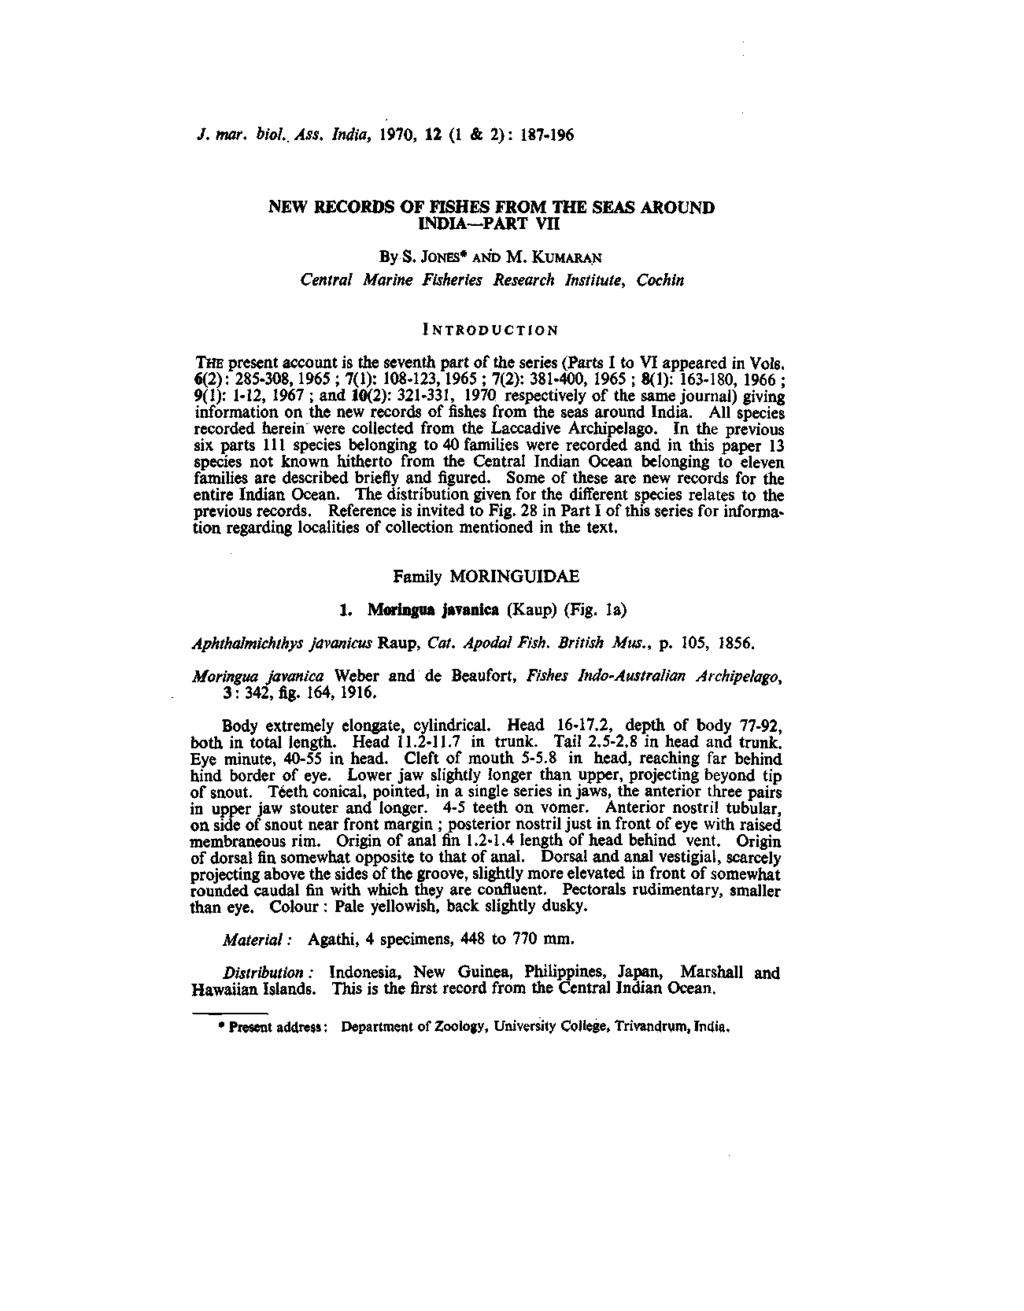 /. mar. biol.. Ass. India, 1970, 12 (1 & 2): 187-196 NEW RECORDS OF FISHES FROM THE SEAS AROUND INDIA PART VII By S. JONES* AND M.